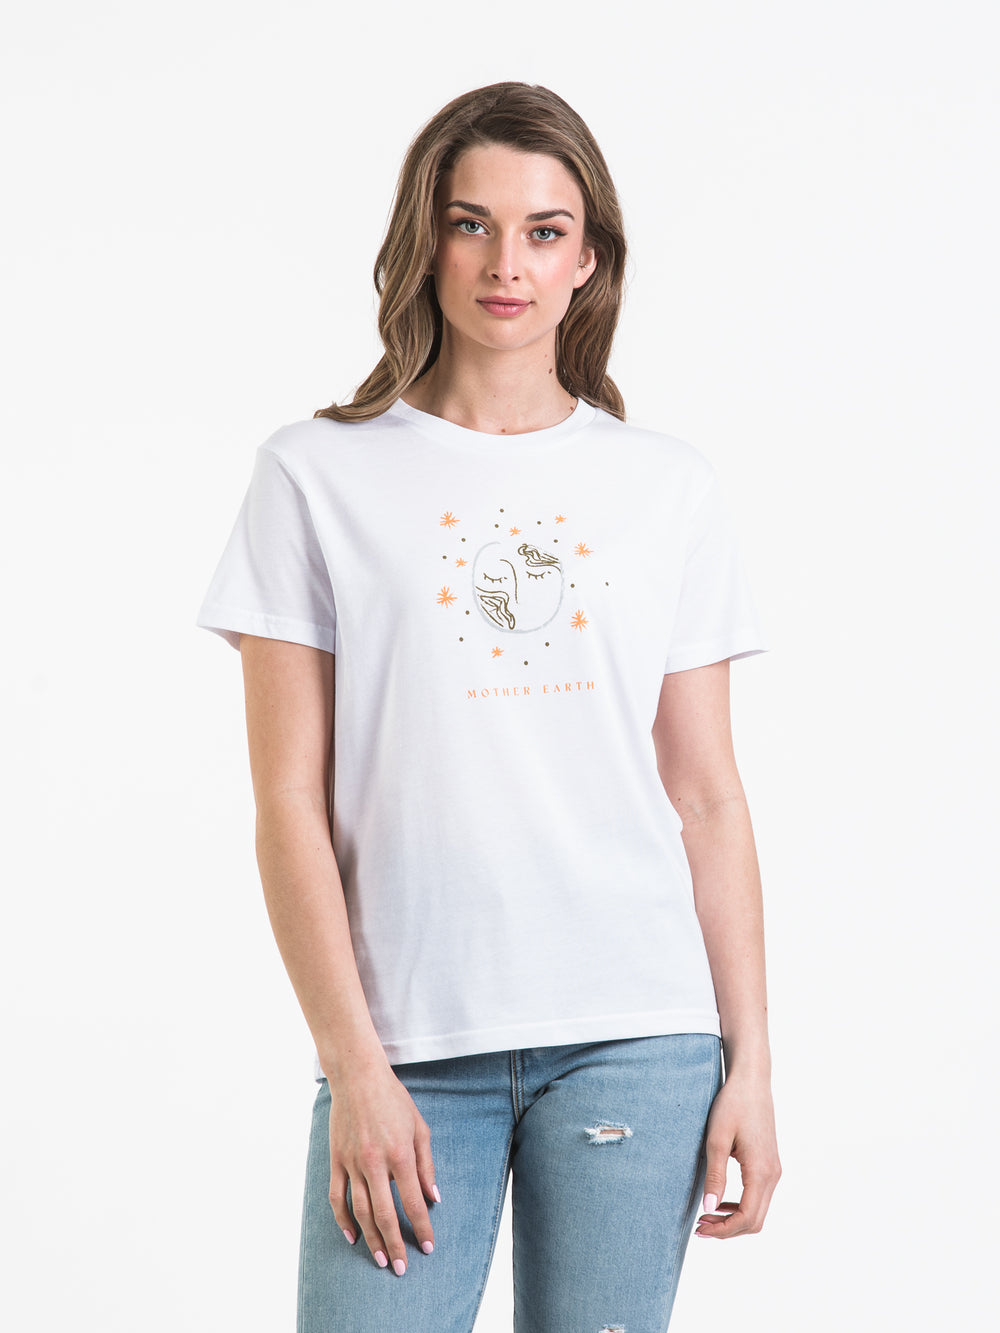 TENTREE MOTHER EARTH T-SHIRT - CLEARANCE